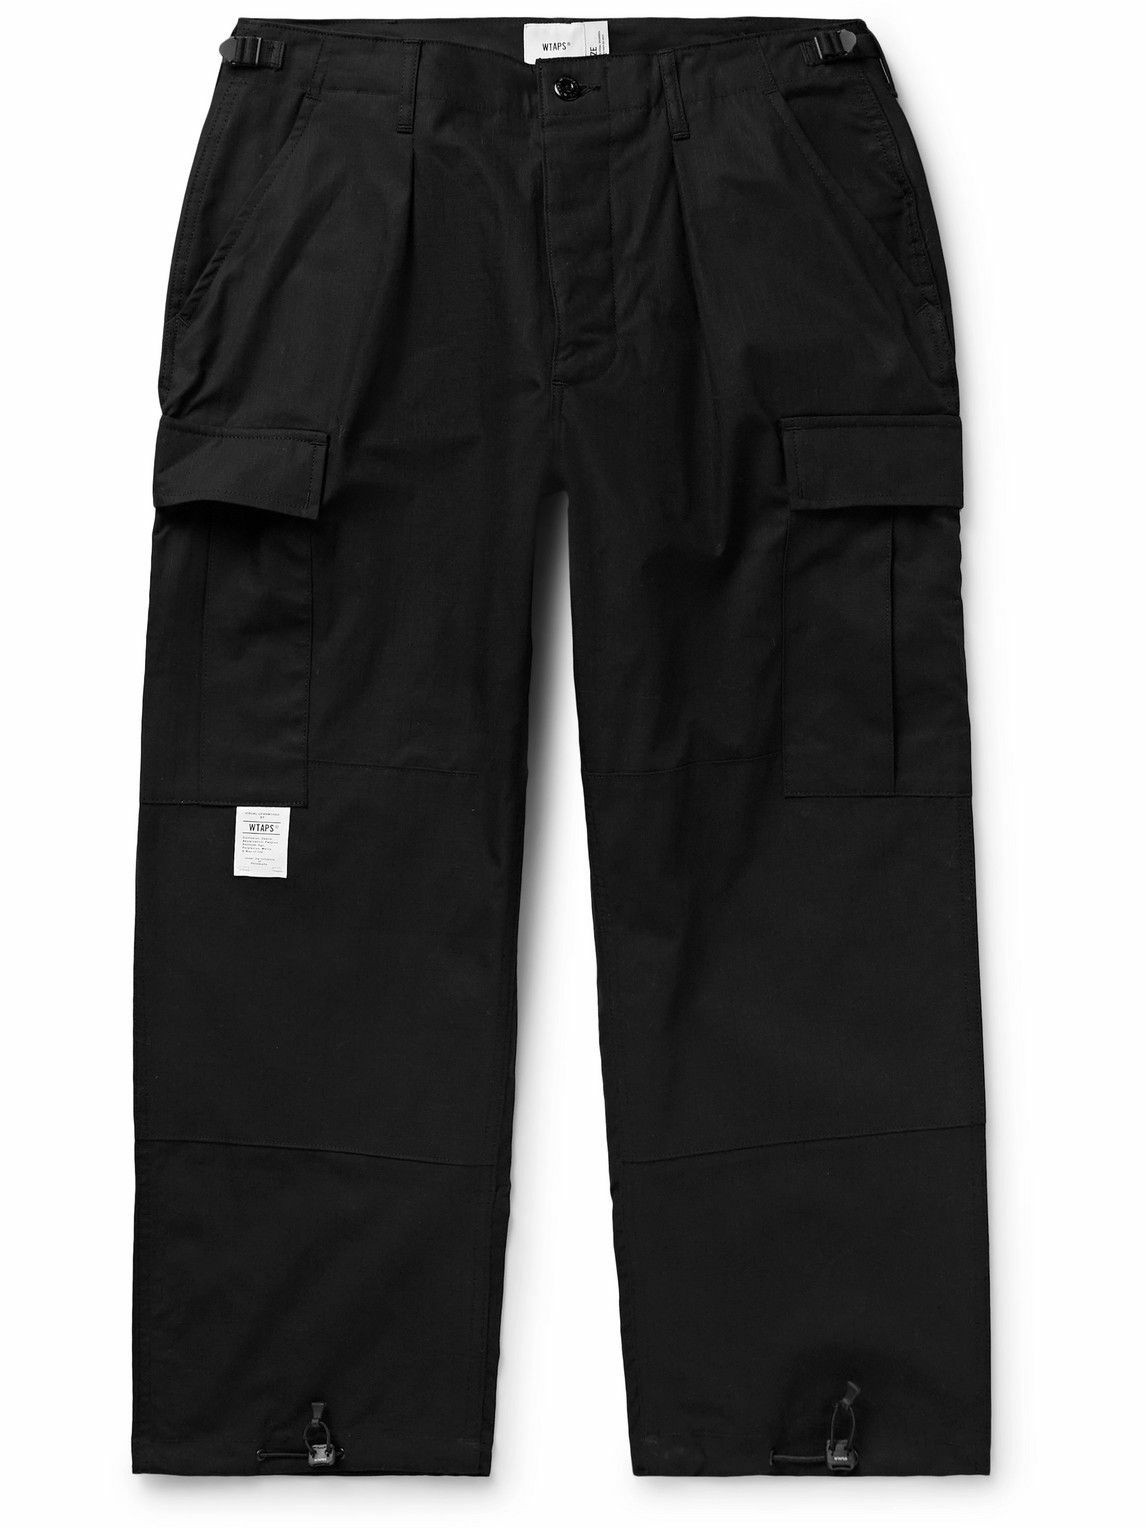 Women's Ankle Pants Hiking: Scout Ripstop